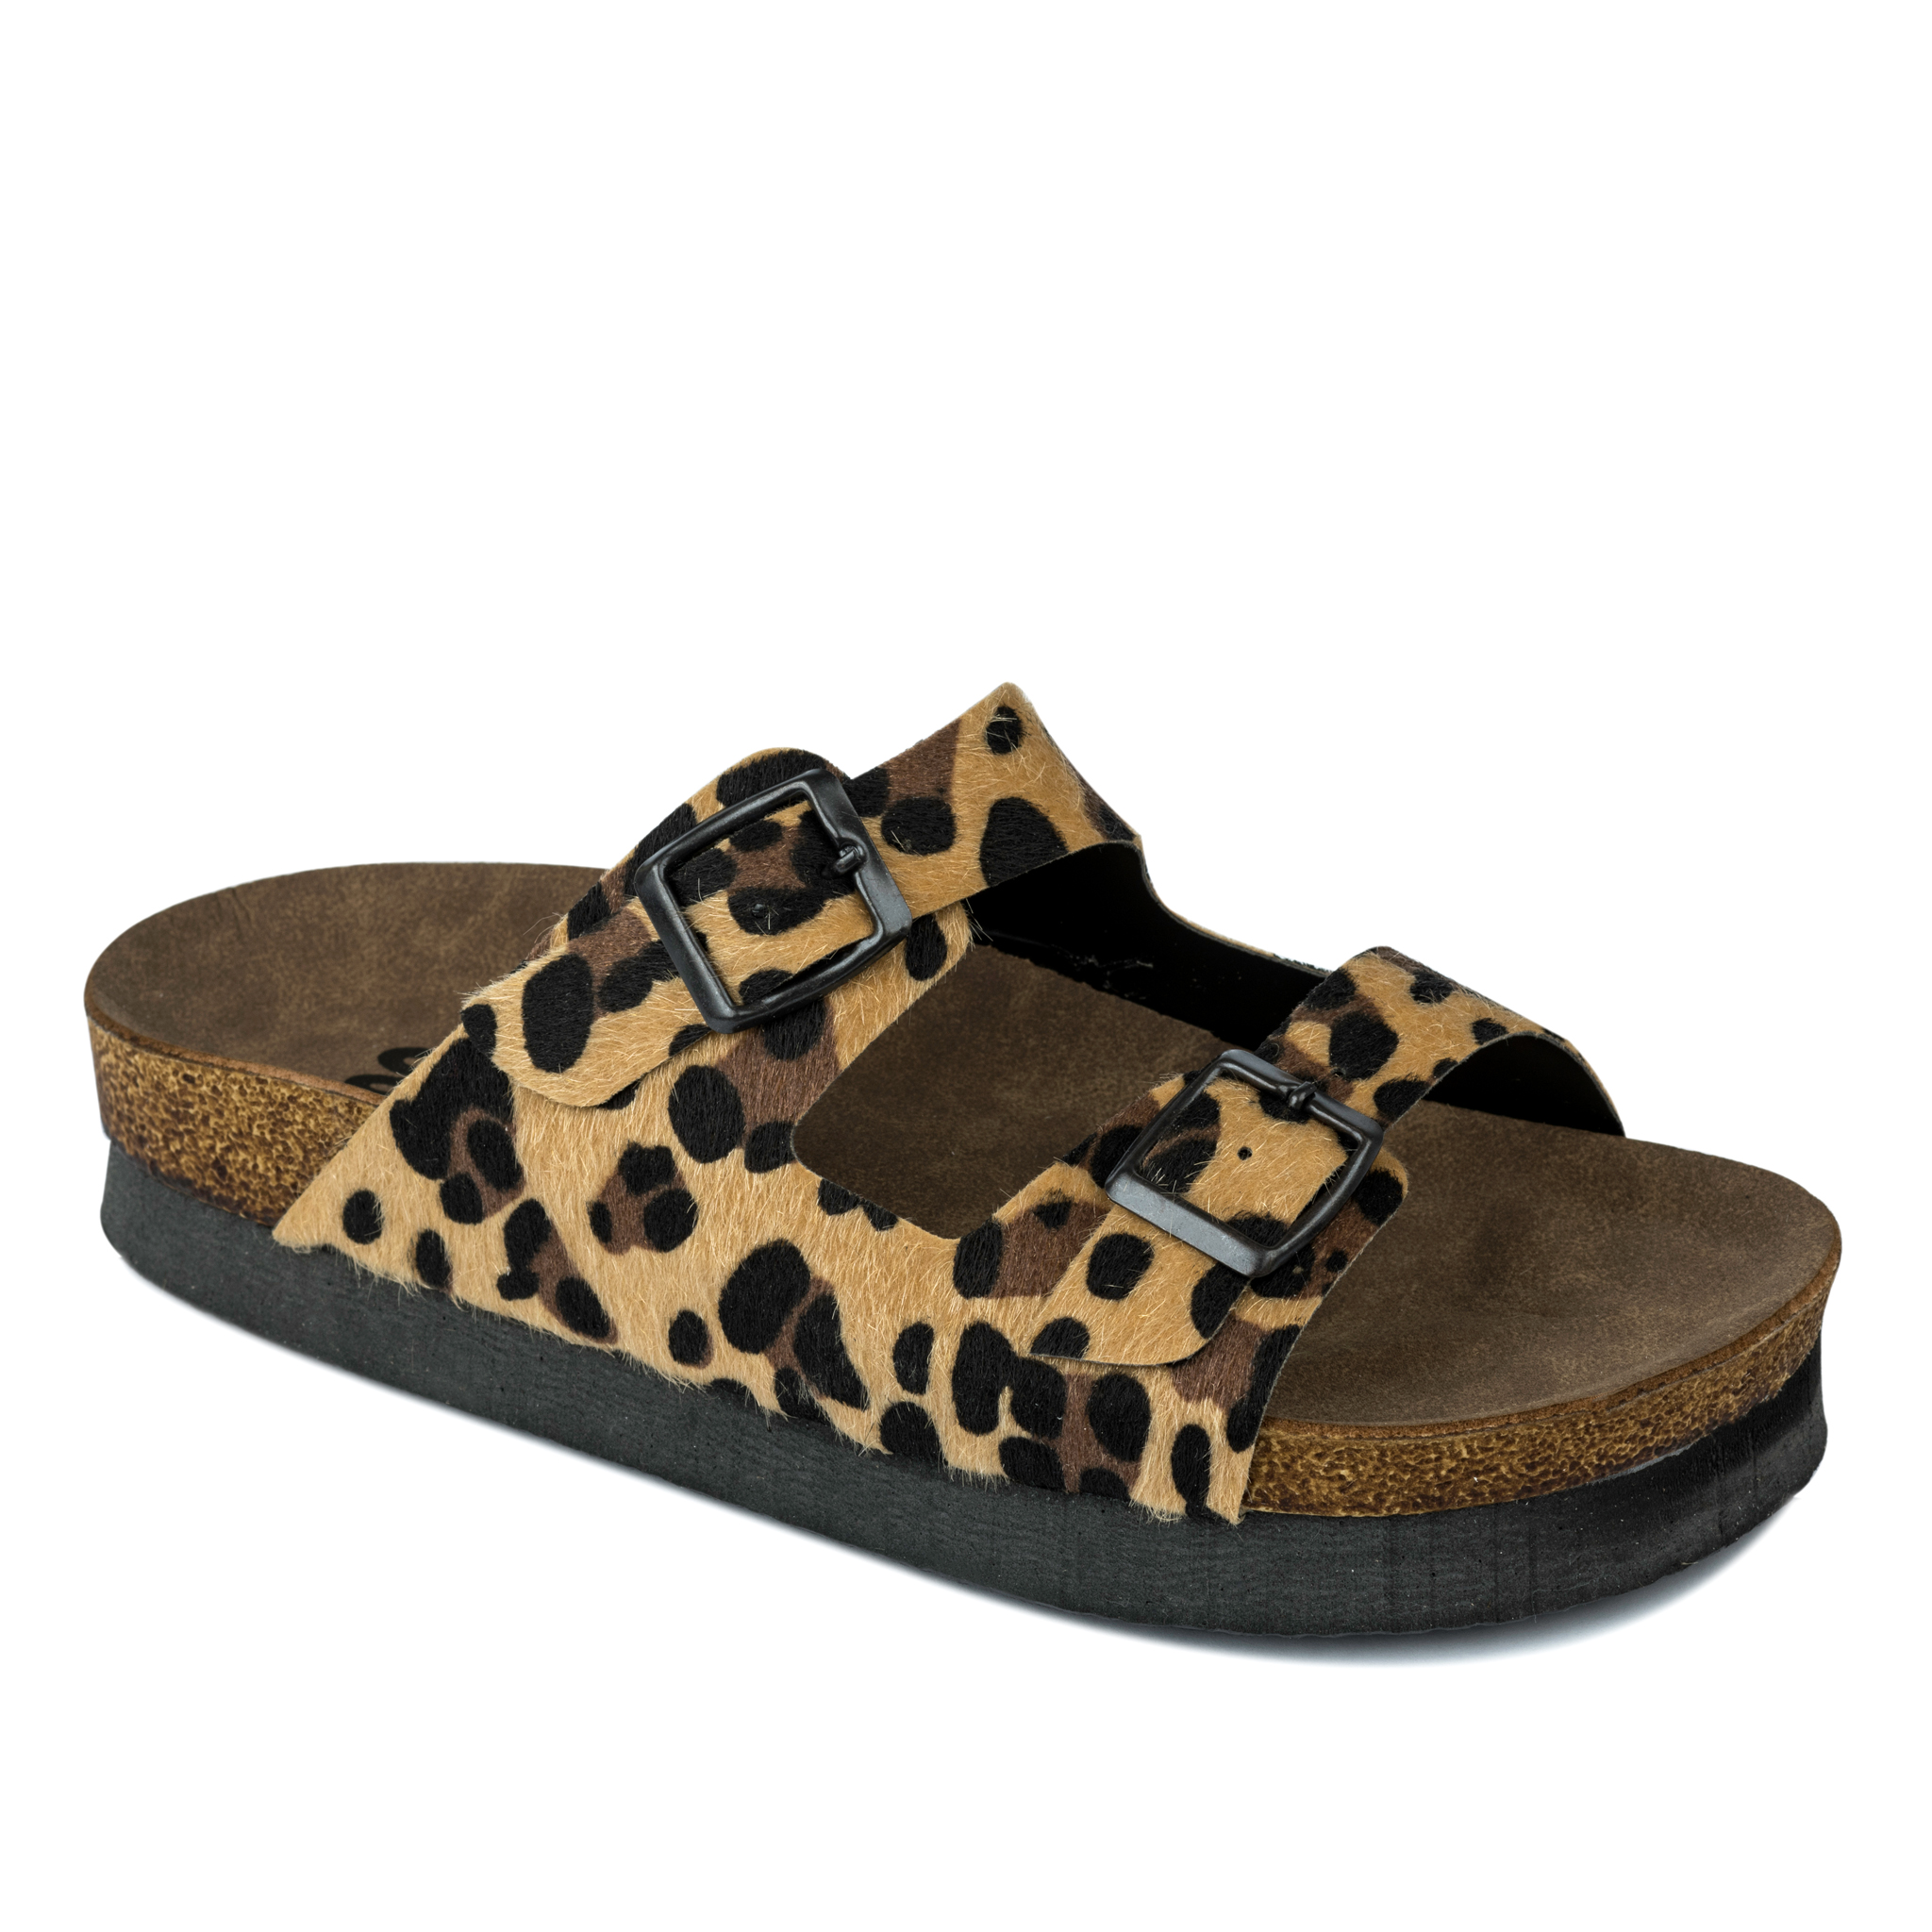 LEOPARD PRINT BELTED SLIPPERS 